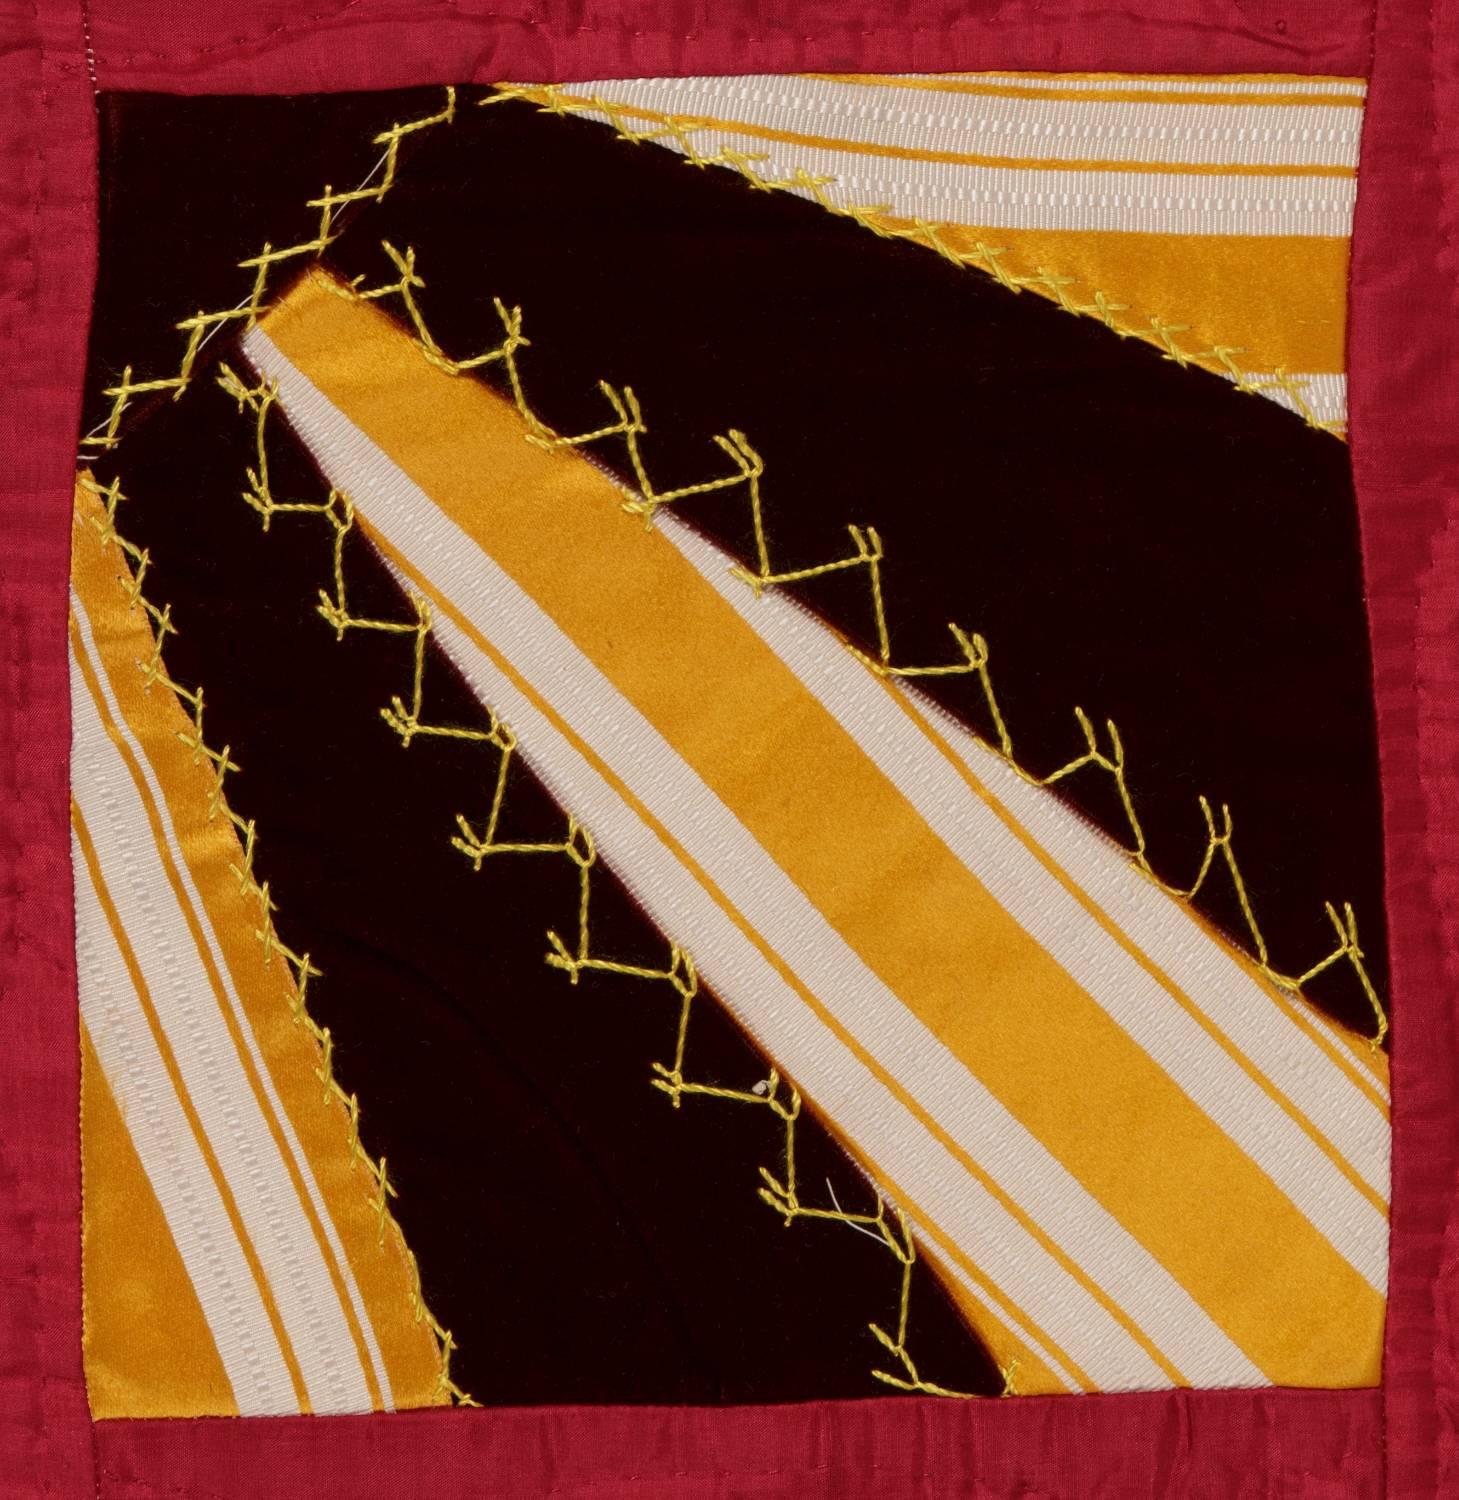 Unusual fan quilt with piecework that resembles neck ties or sun rays.  Made from ribbon silks and velvets, circa 1870-1890.  Lancaster County, Pennsylvania origin.  Probably Mennonite.  A masterpiece of Pennsylvania German folk art.

Mounting: 